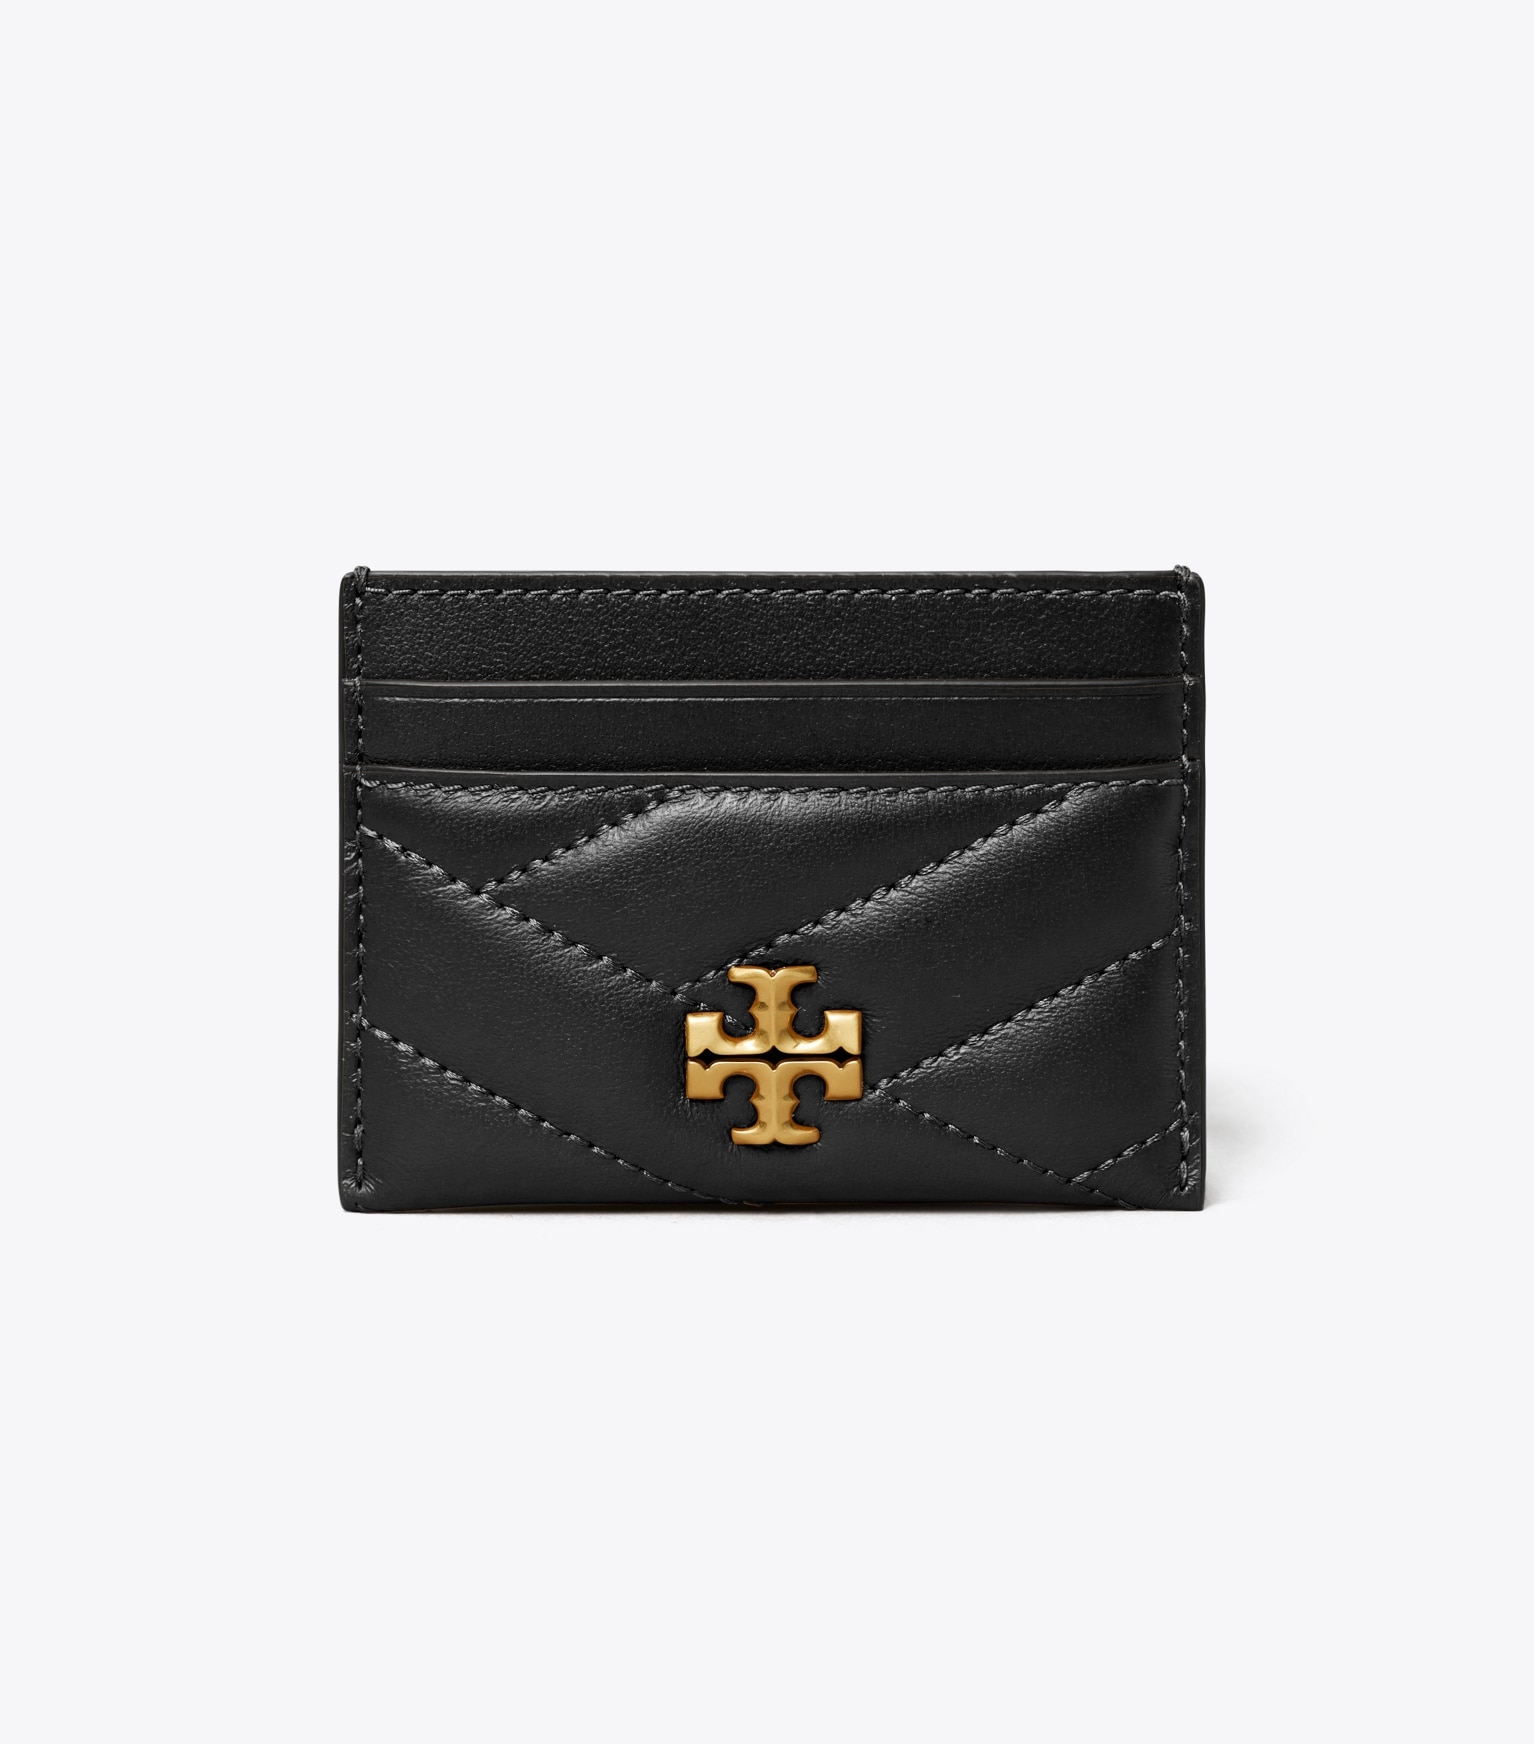 black leather card case with Tory Burch logo